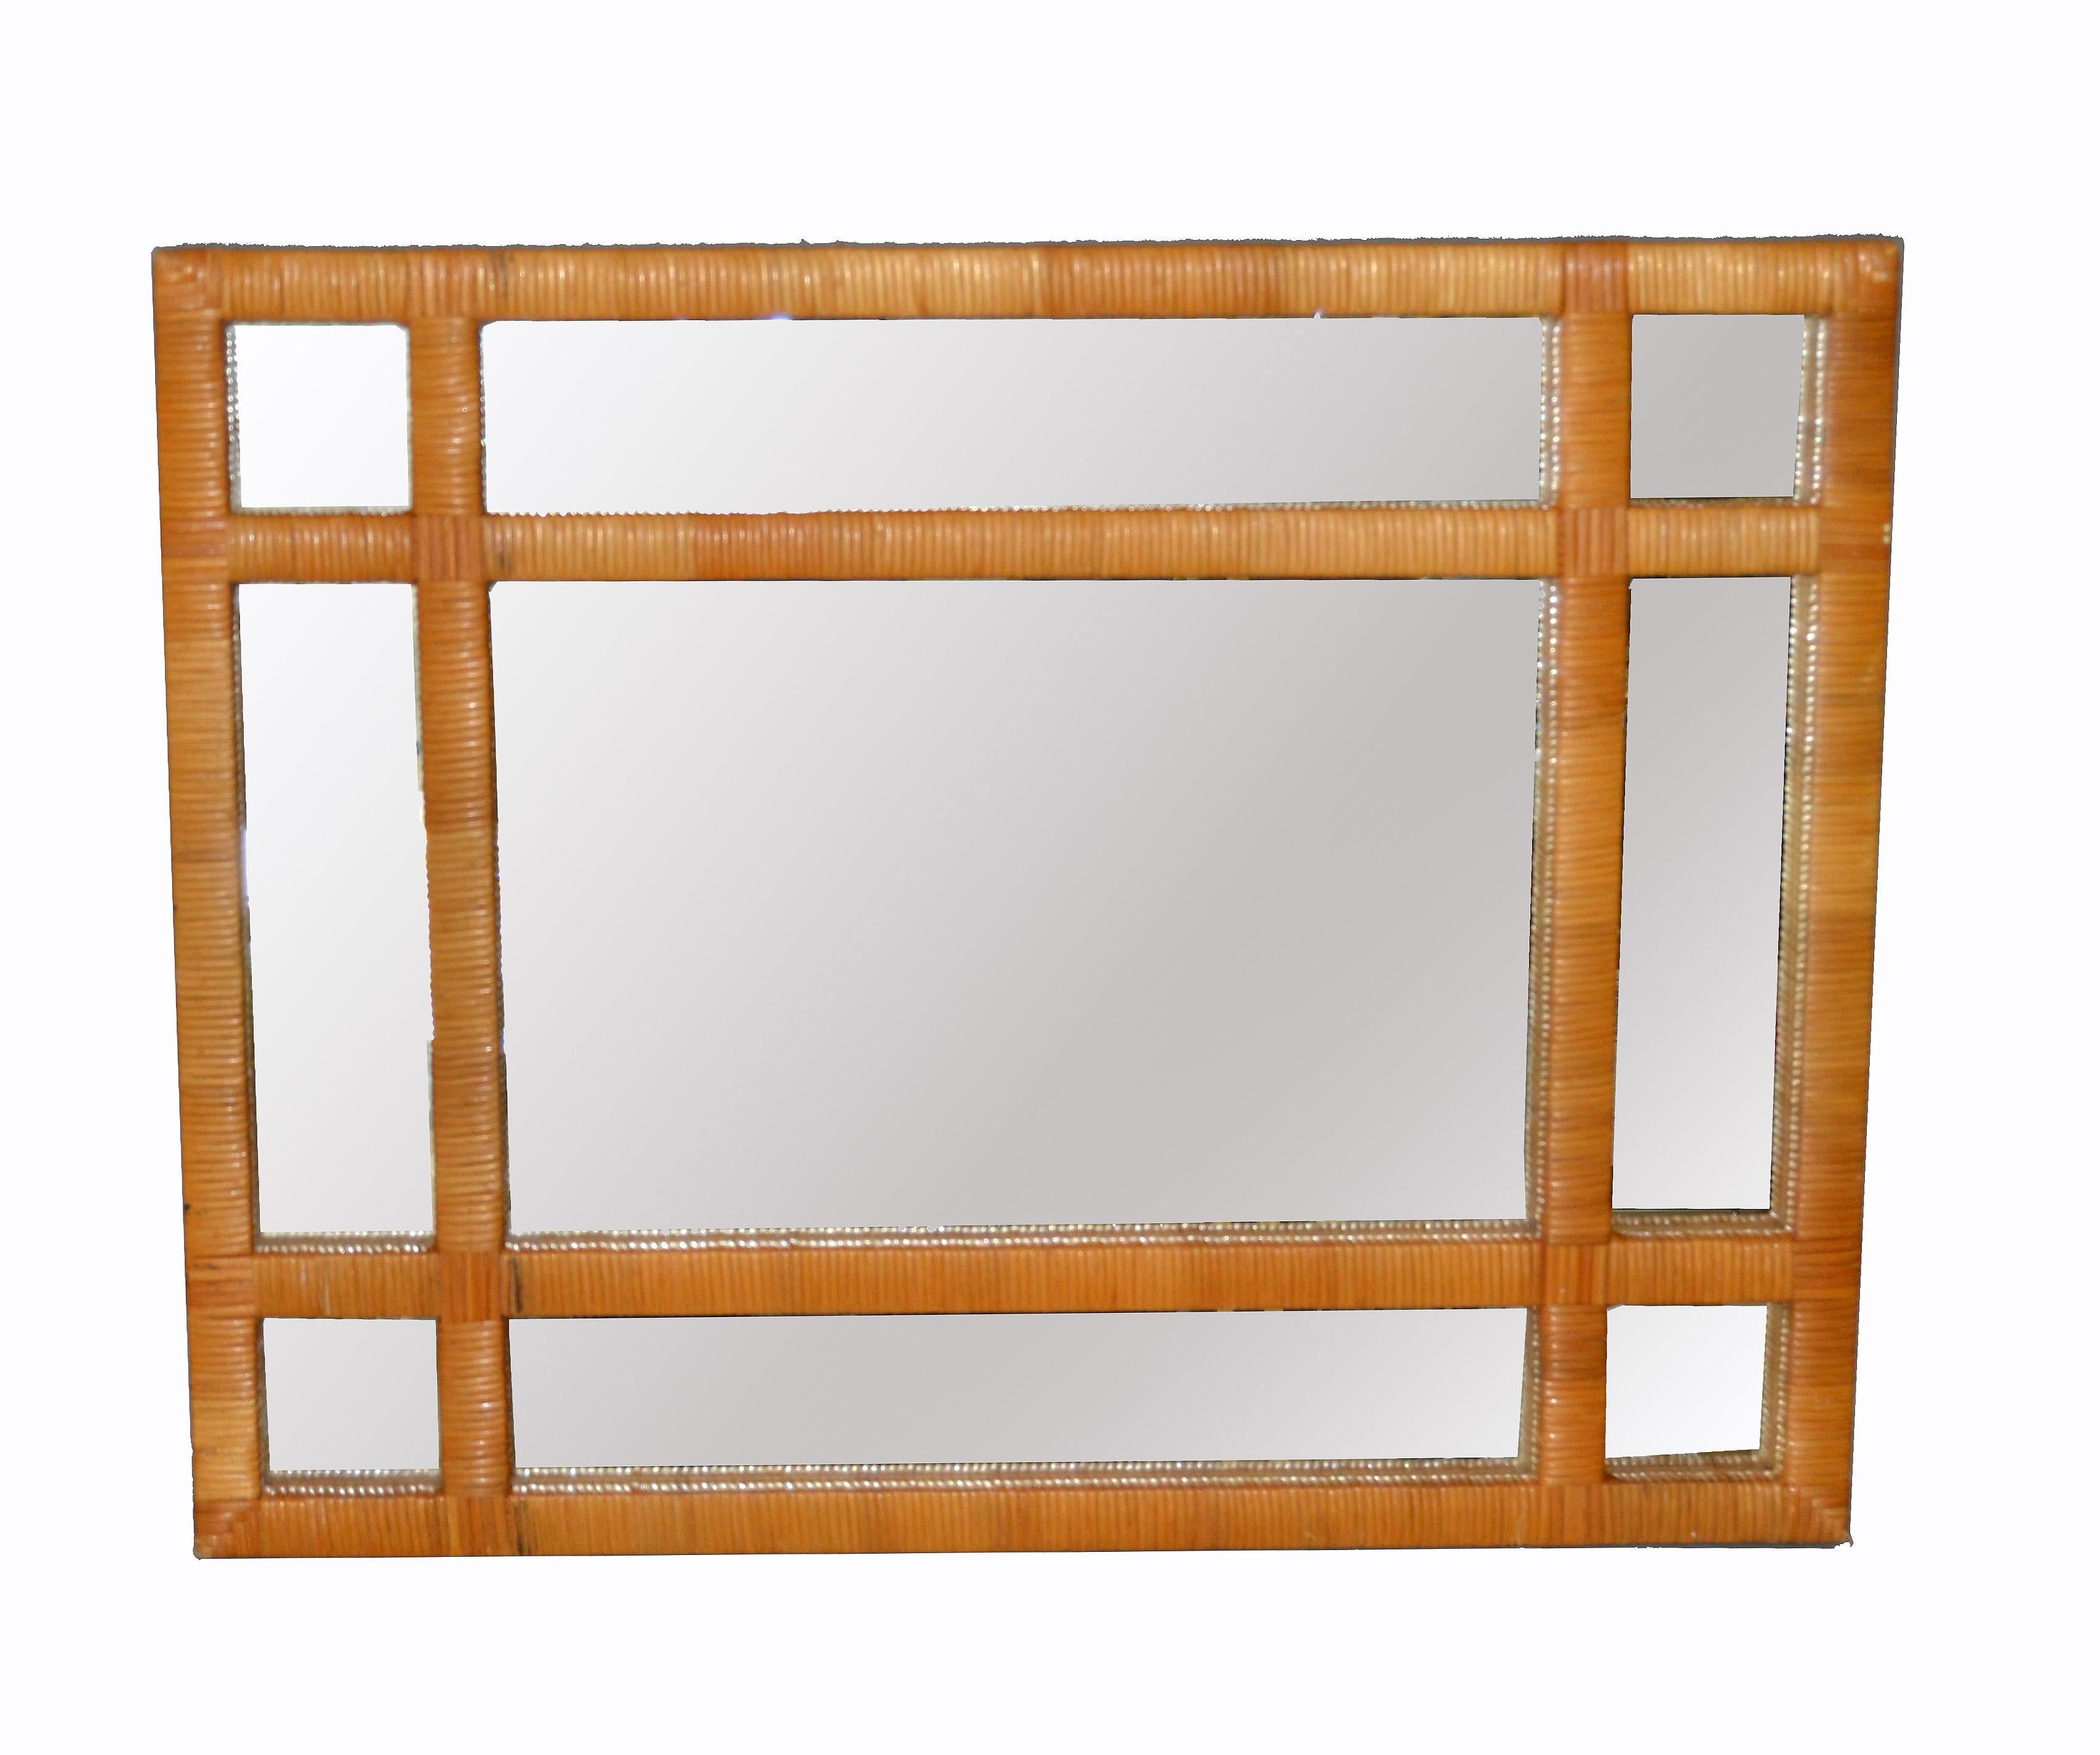 Mid-Century Modern rectangular handwoven rattan wicker wall mirror.
The mirror can be hung vertical and horizontal.
 